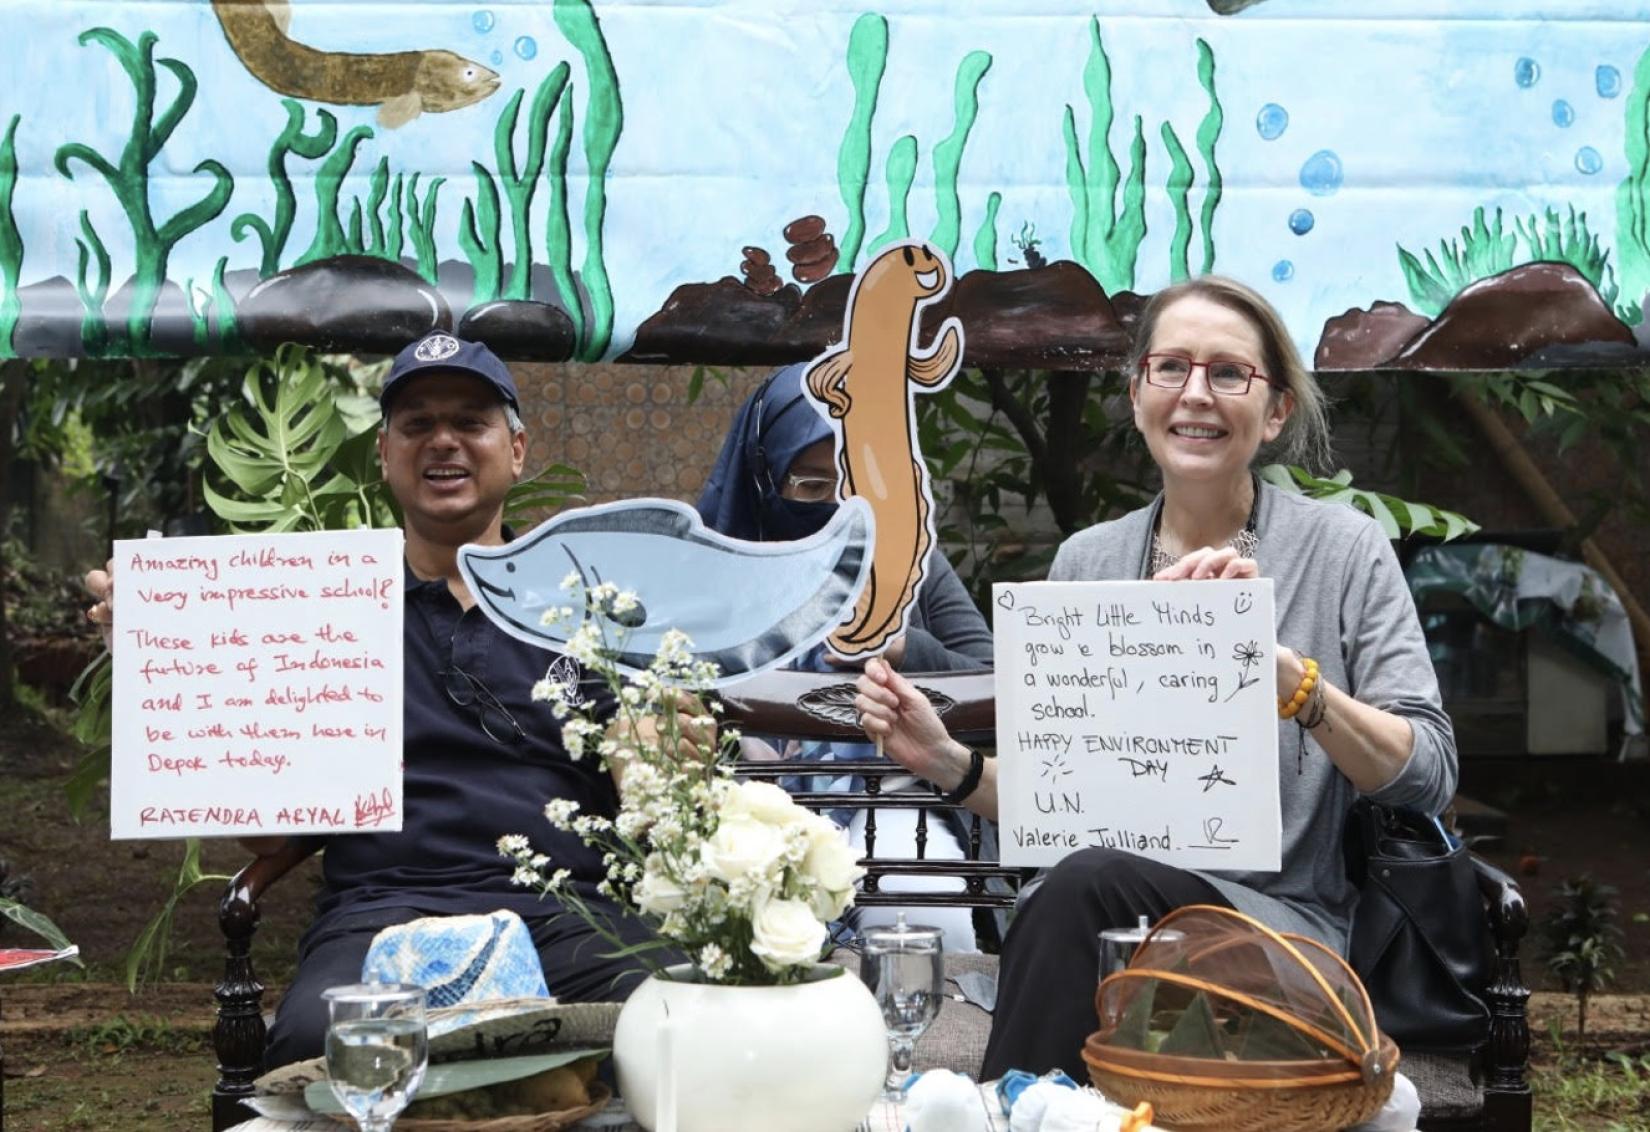 UN Resident Coordinator in Indonesia Valerie Julliand and FAO Representative Rajendra Ayal hold up plaques commemorating their visit to Sekolah Alam Matoa, West Java on June 16, 2022